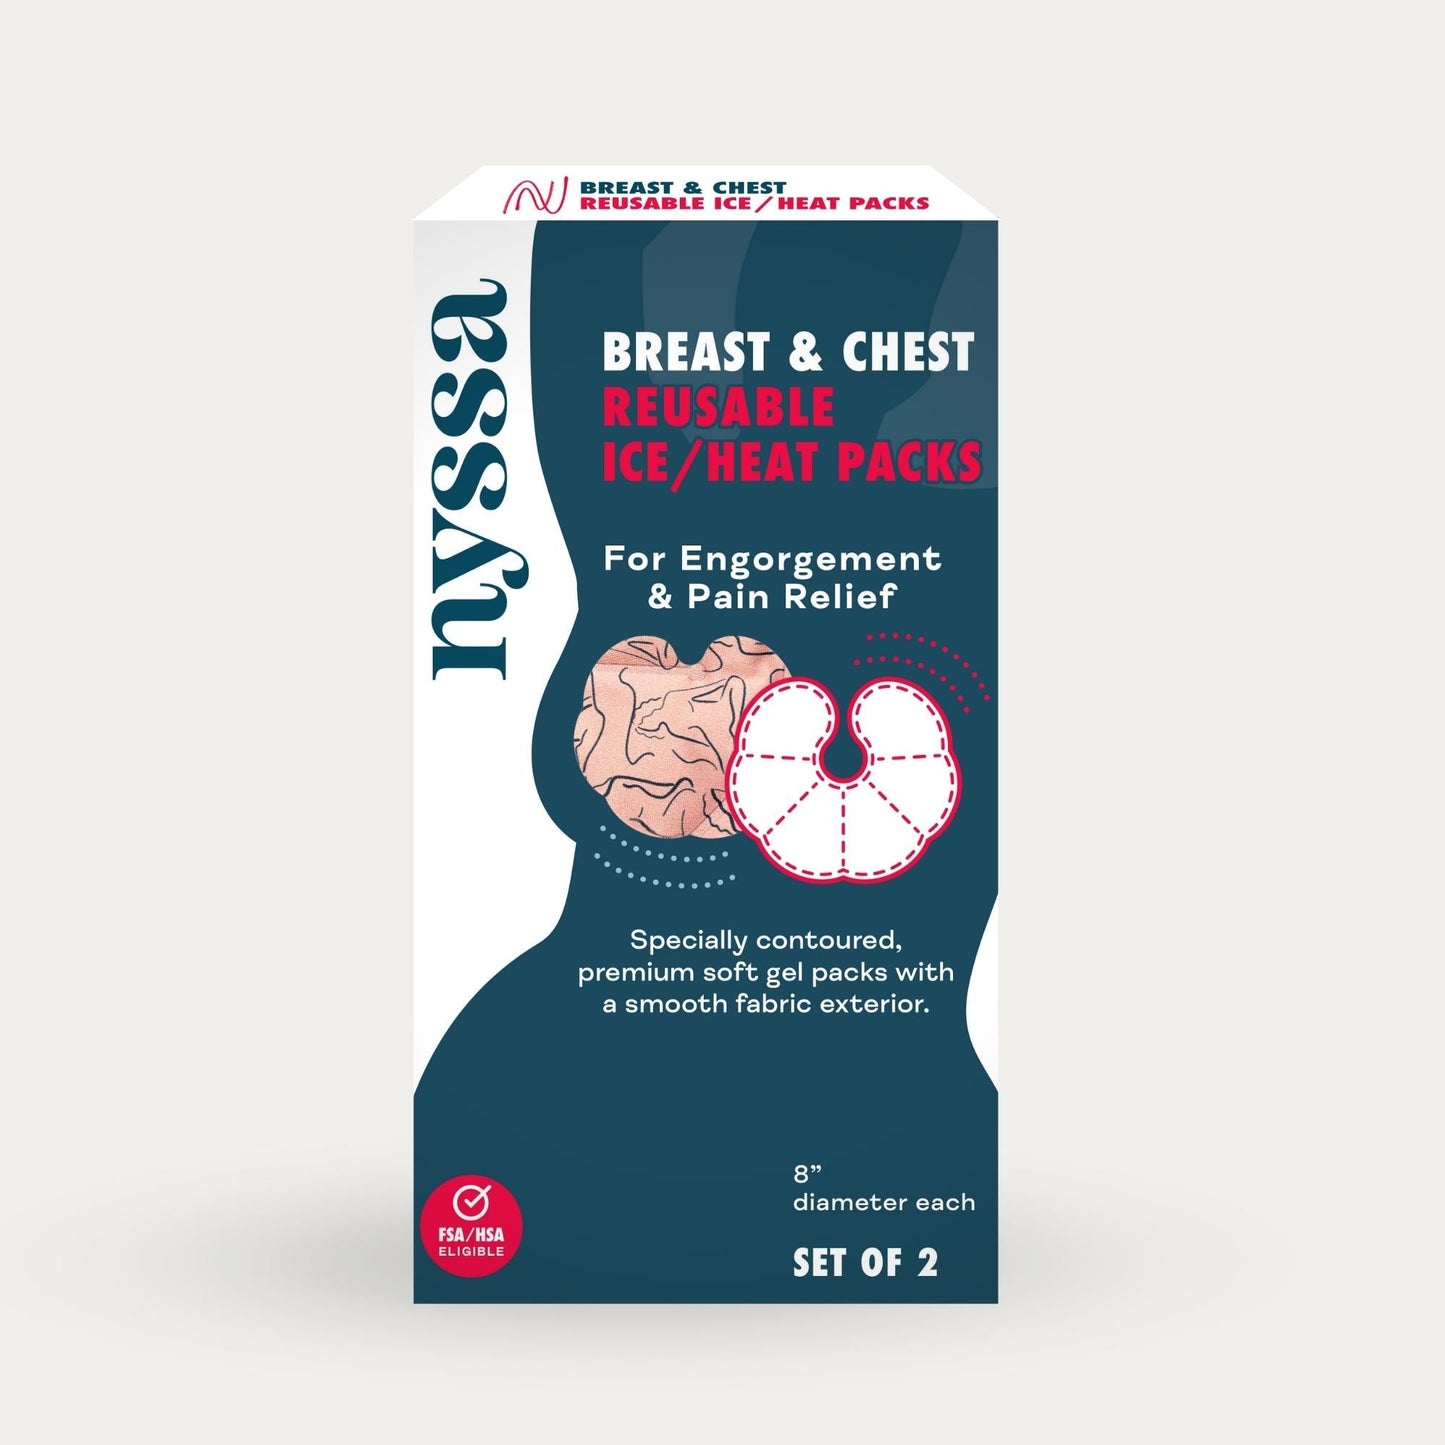 8-CT or 16-CT Breast & Chest Reusable Ice/Heat Packs, Boxed Sets in Display-Ready Trays